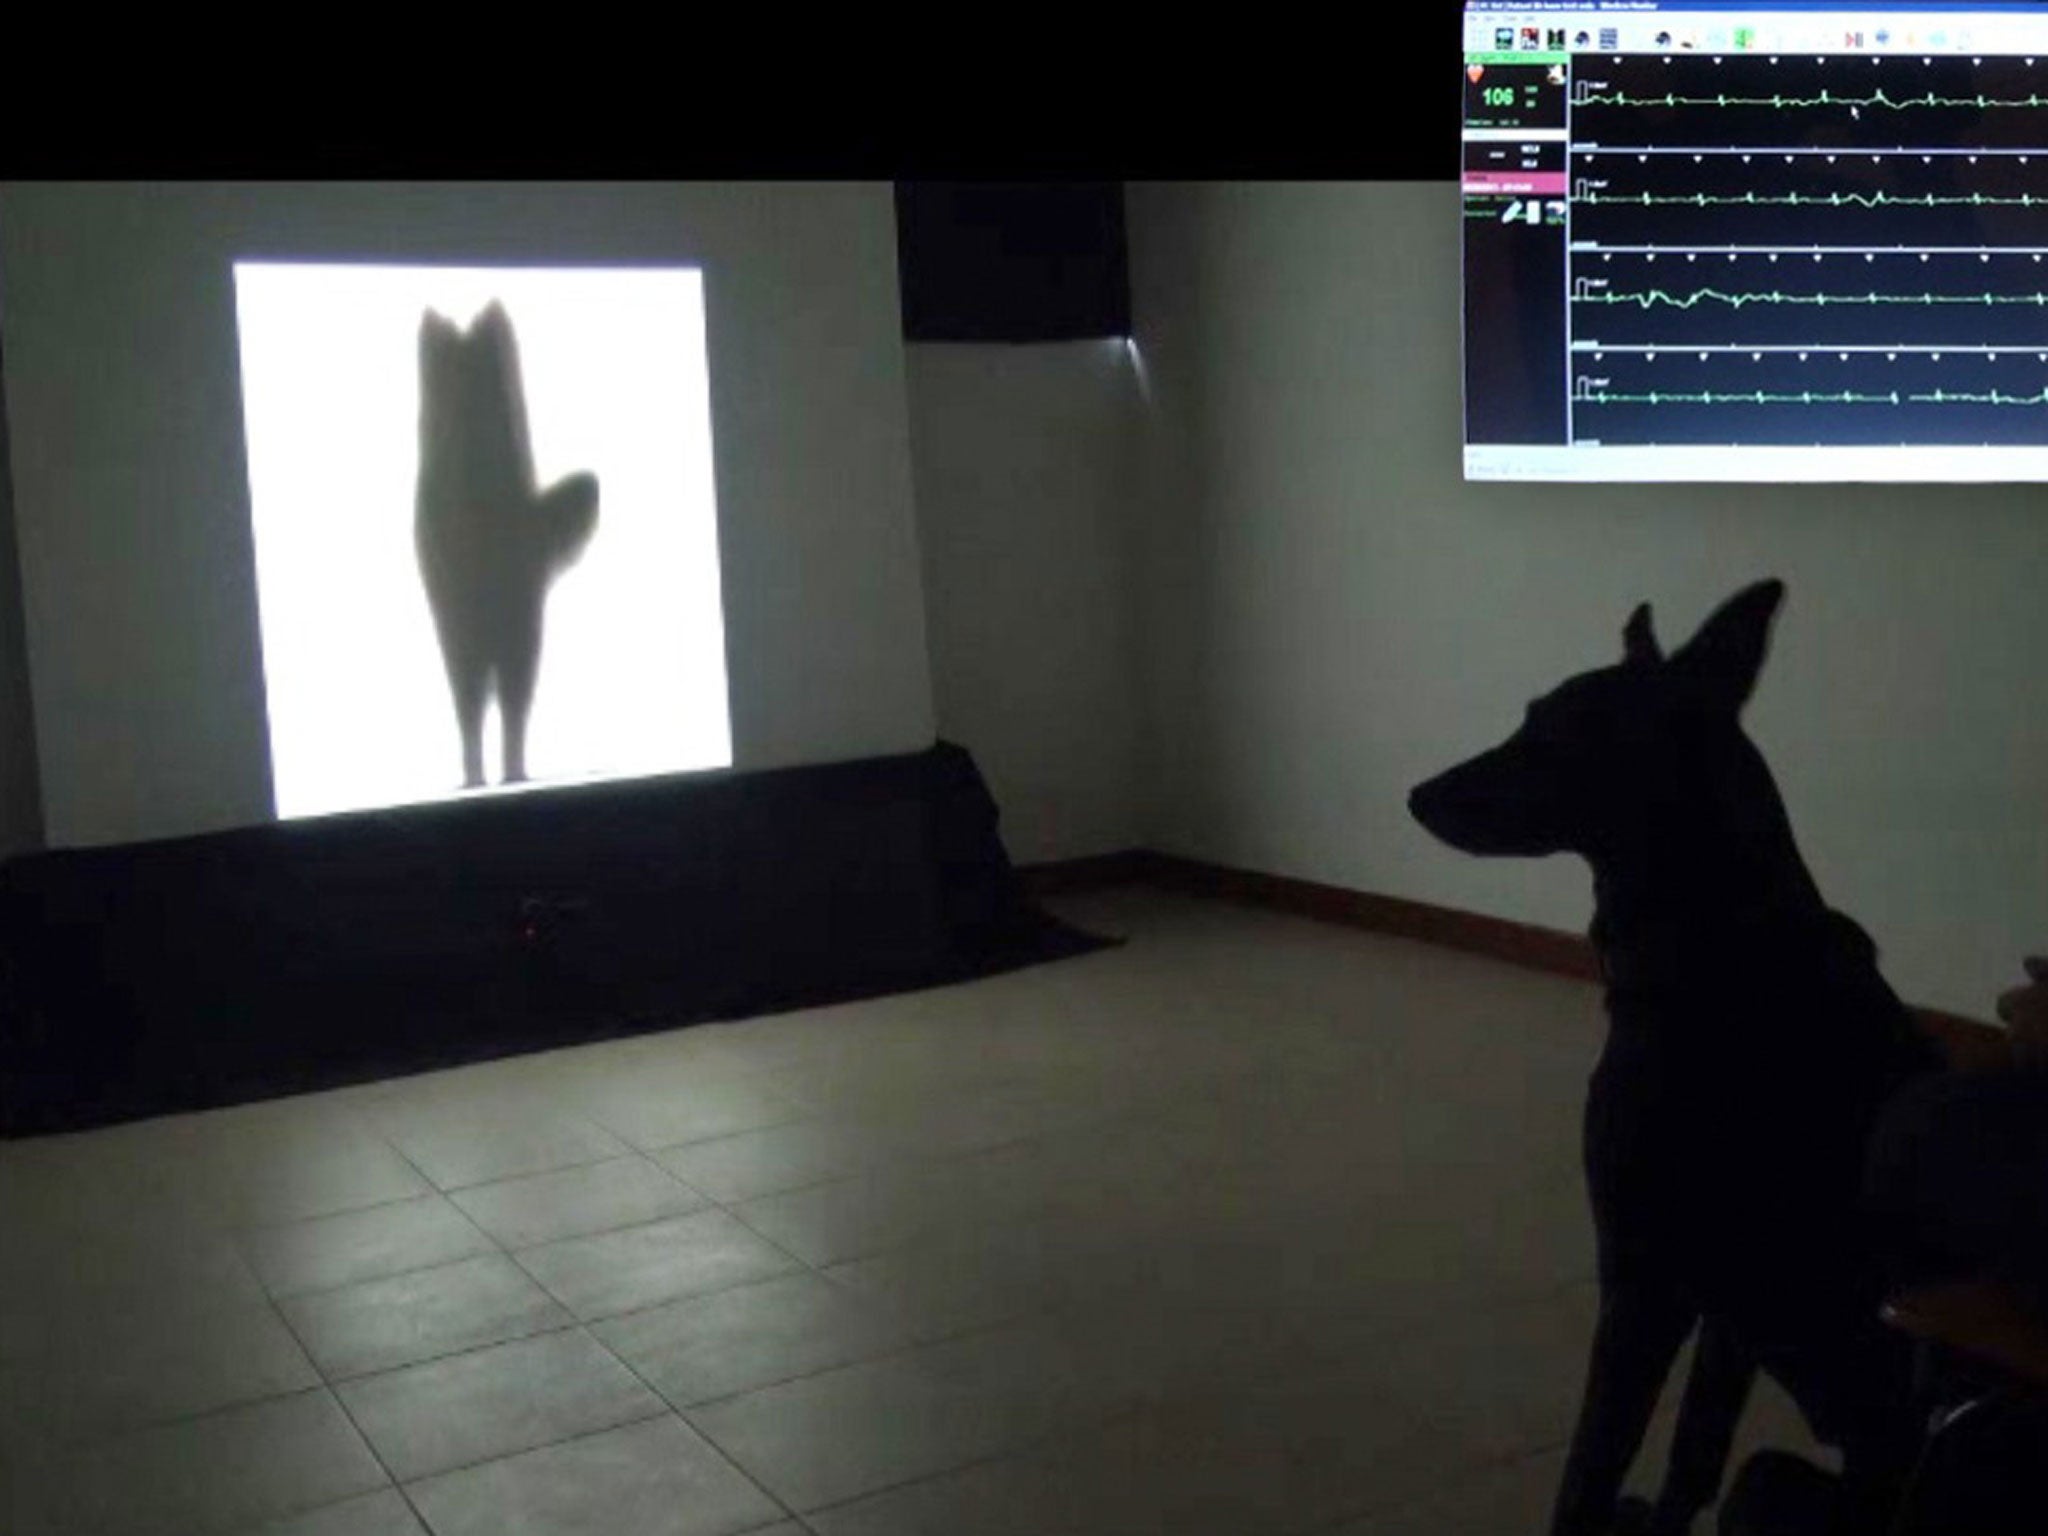 Dogs signal to other dogs via their tails in ways hidden from humans. At top right is an inset image of the dog's heart rate while the dog was watching the video